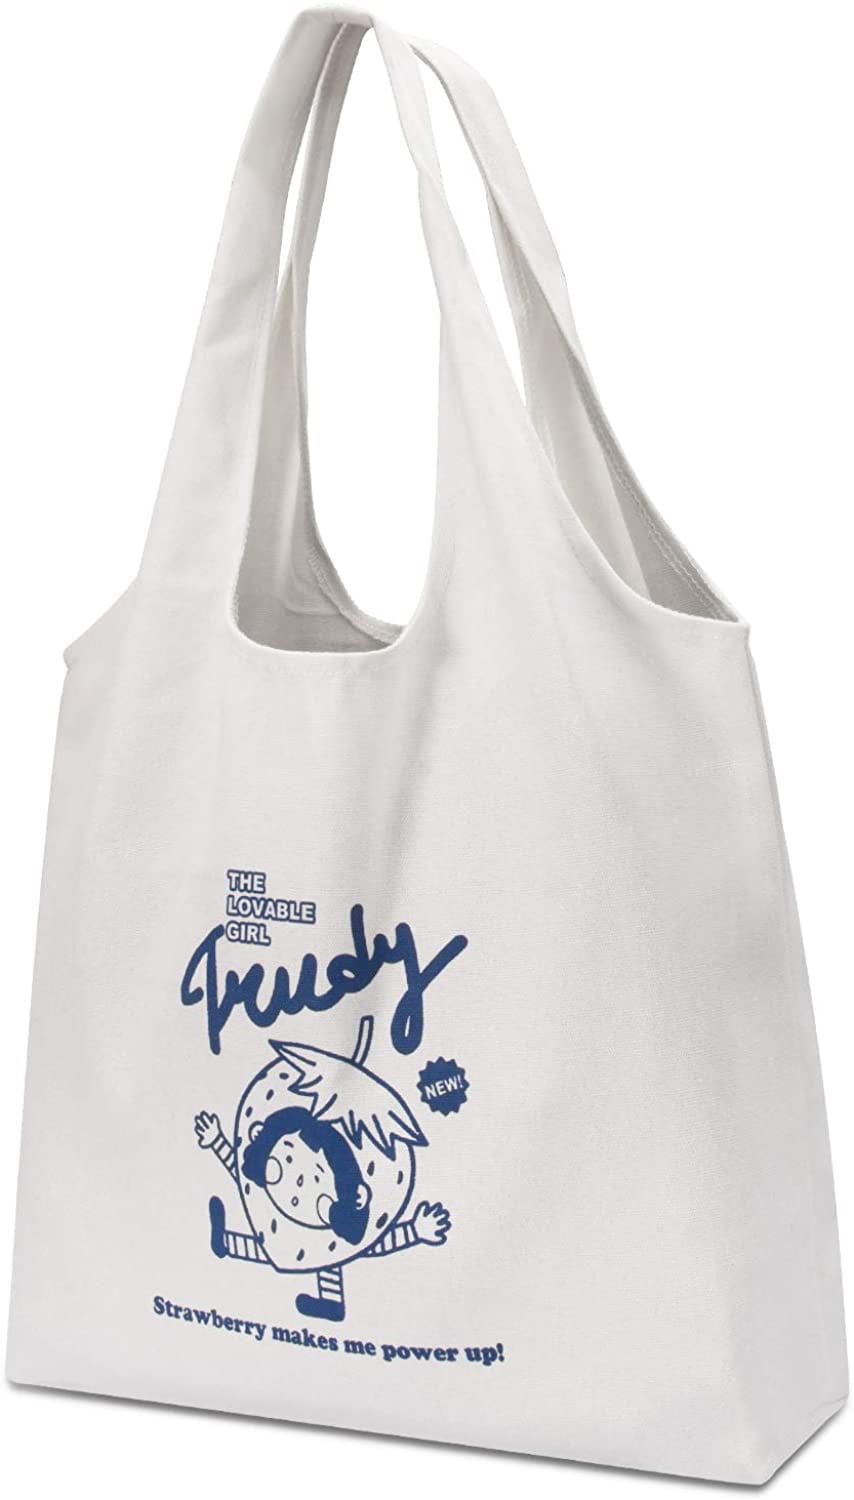 Large Tote Bags for Carrying Bulk Items Extra Large Reusable Bags Prime Line Packaging 5 Pcs Storage Shopping Bags 21x13x14 